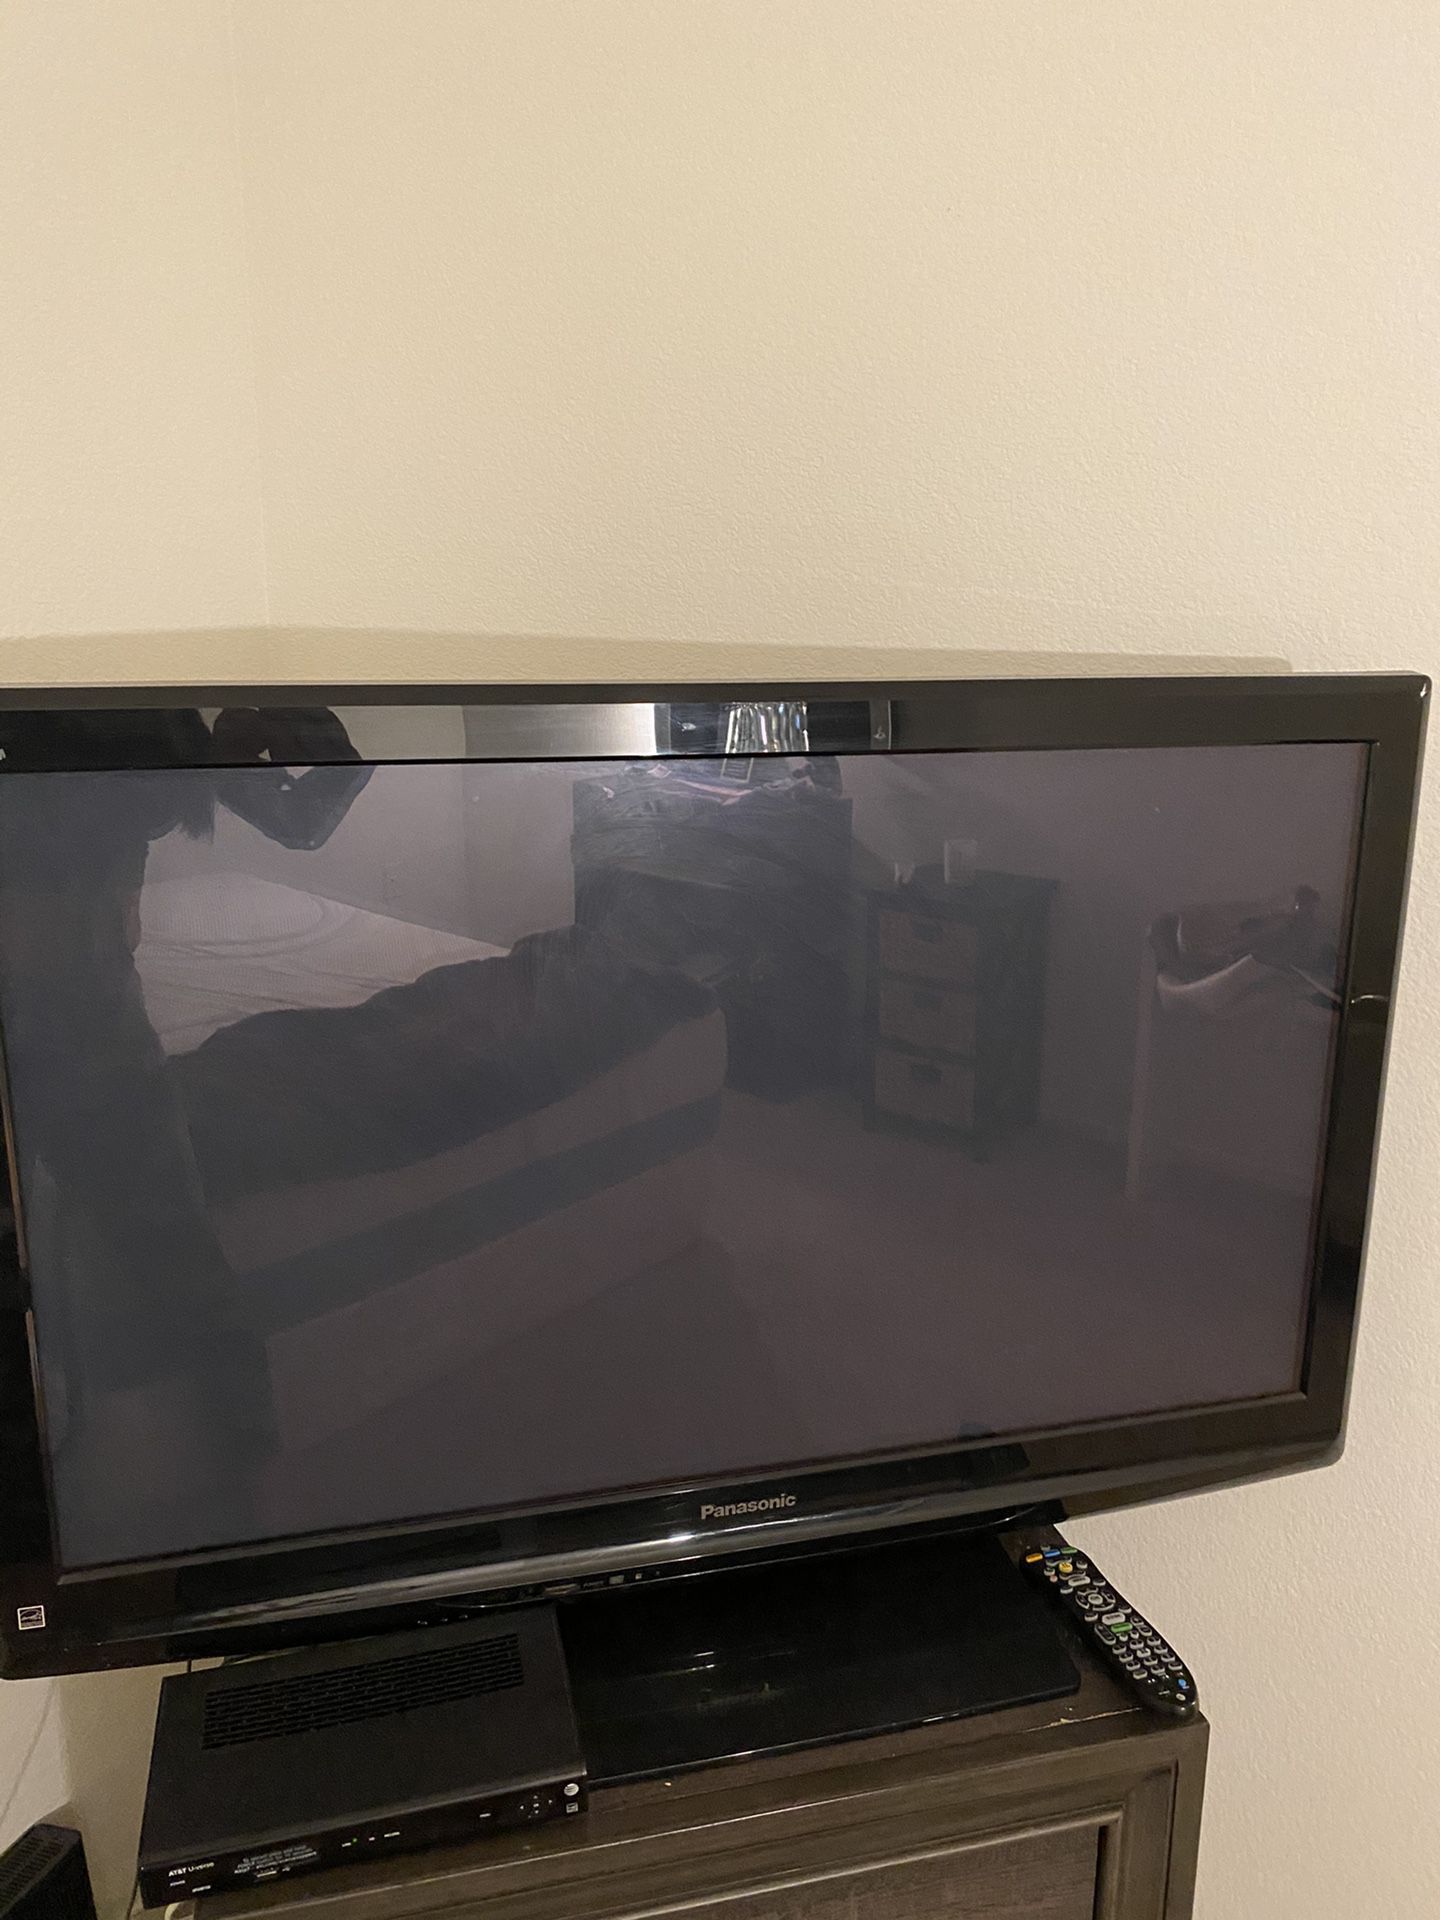 Panasonic really good TV size 40 inch excellent condition moving sell